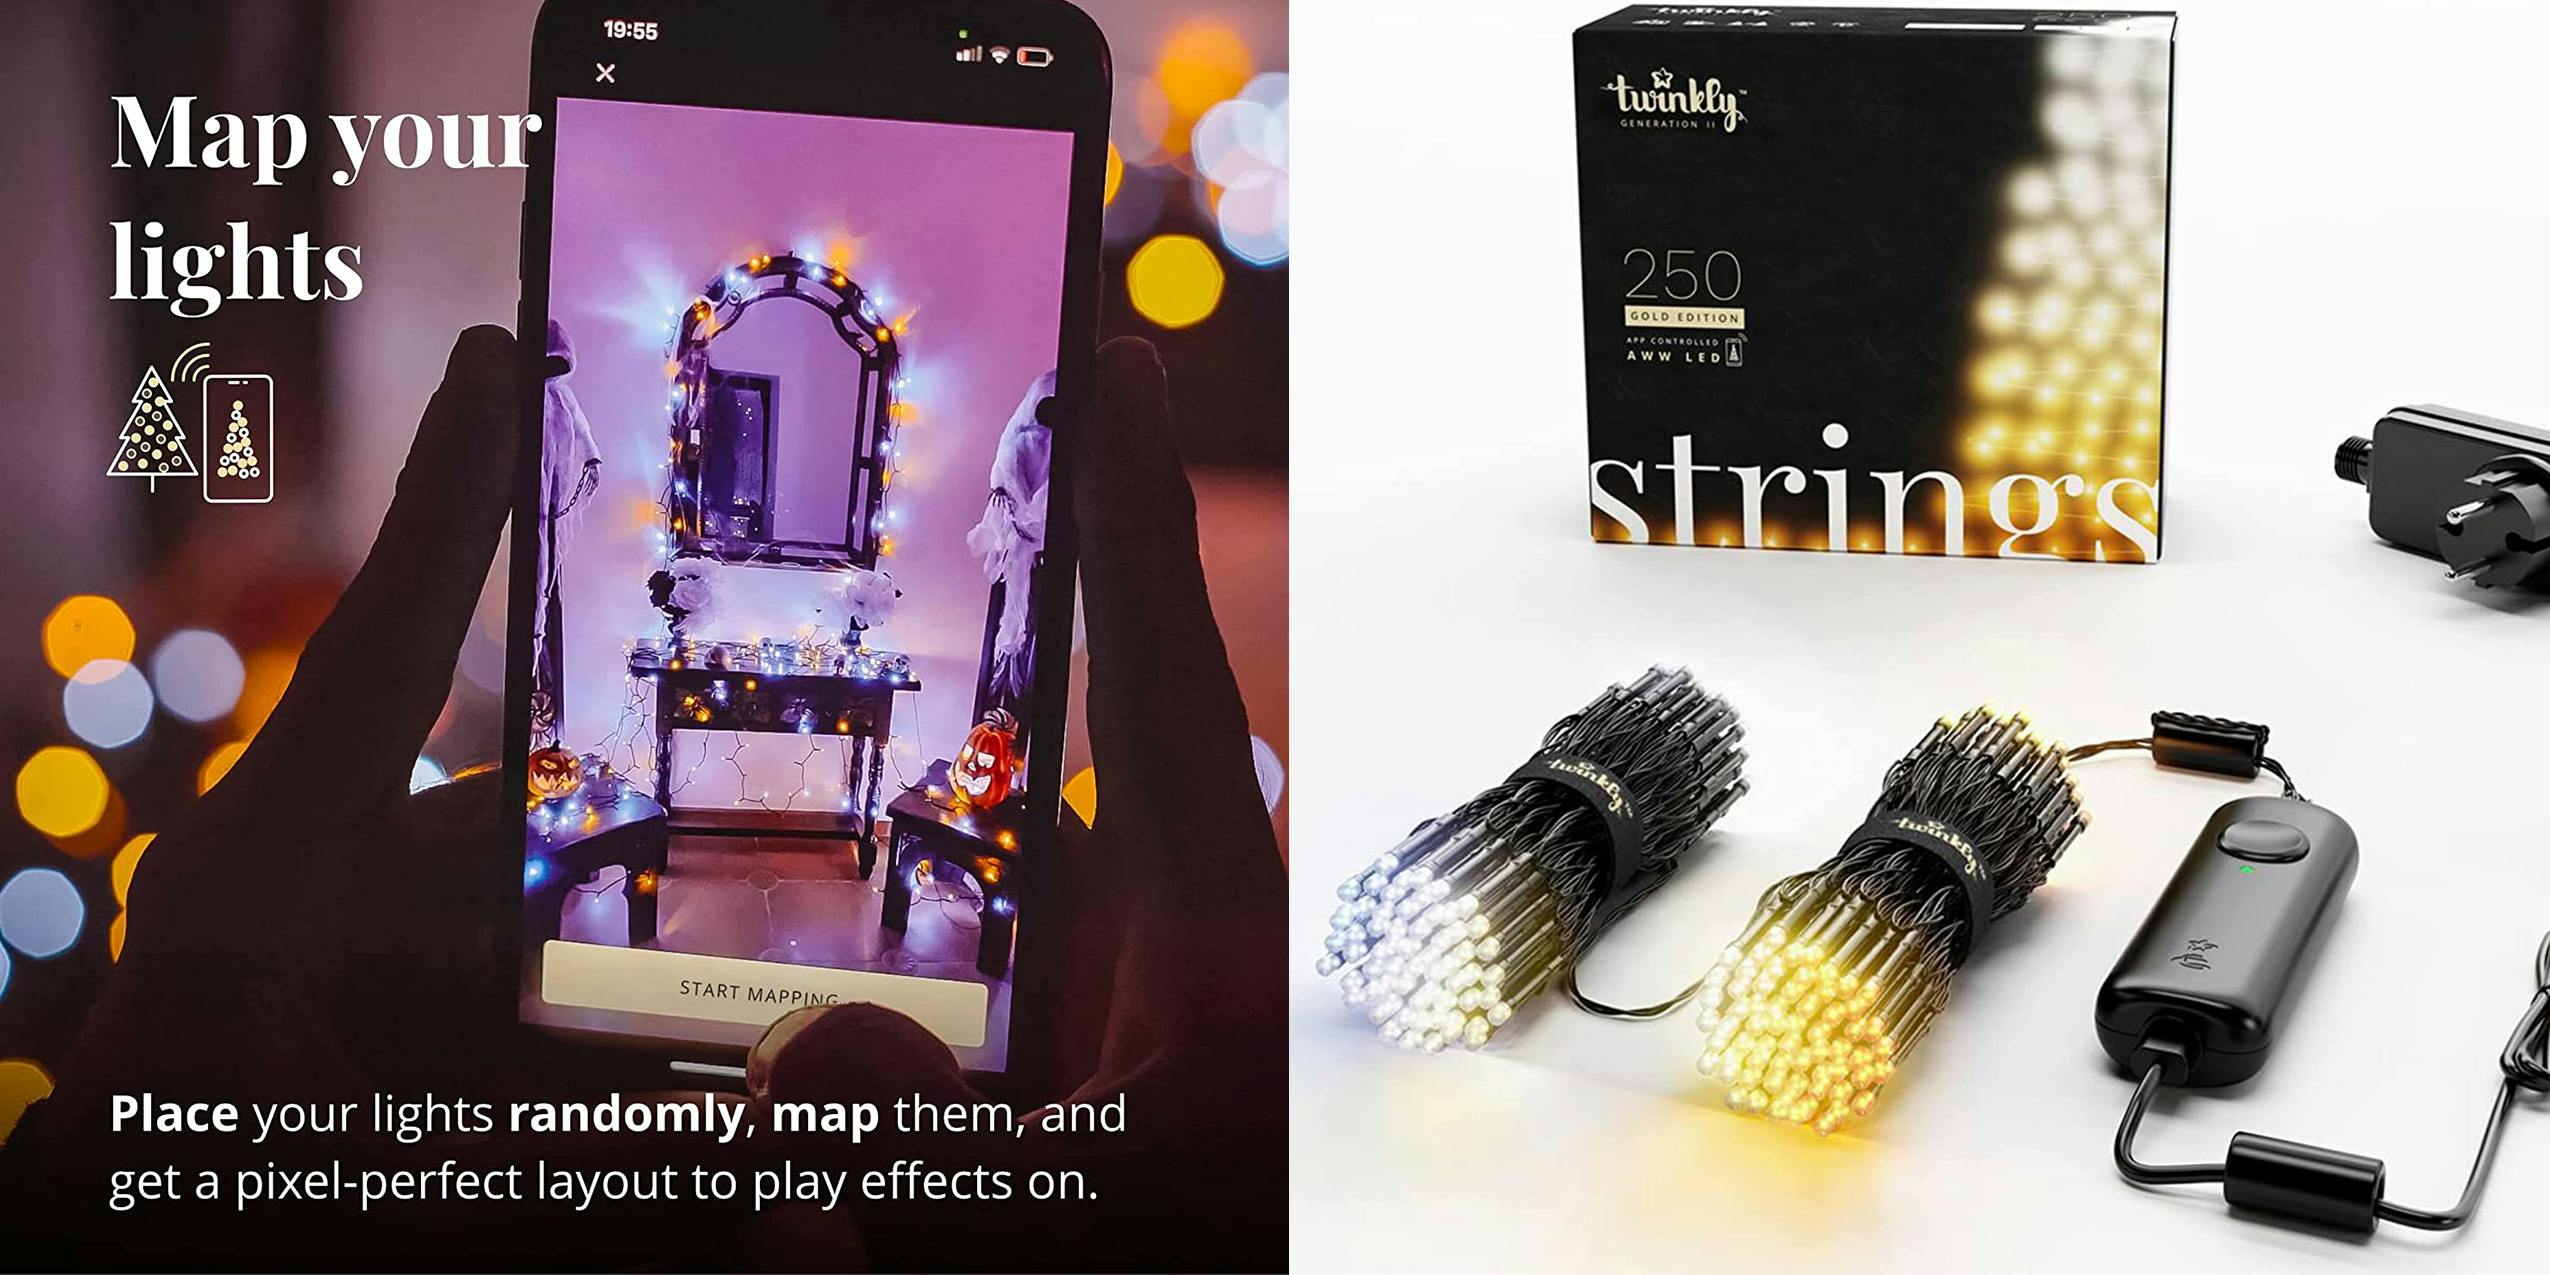 Twinkly Gold Edition Smart Christmas Lights features and product image.